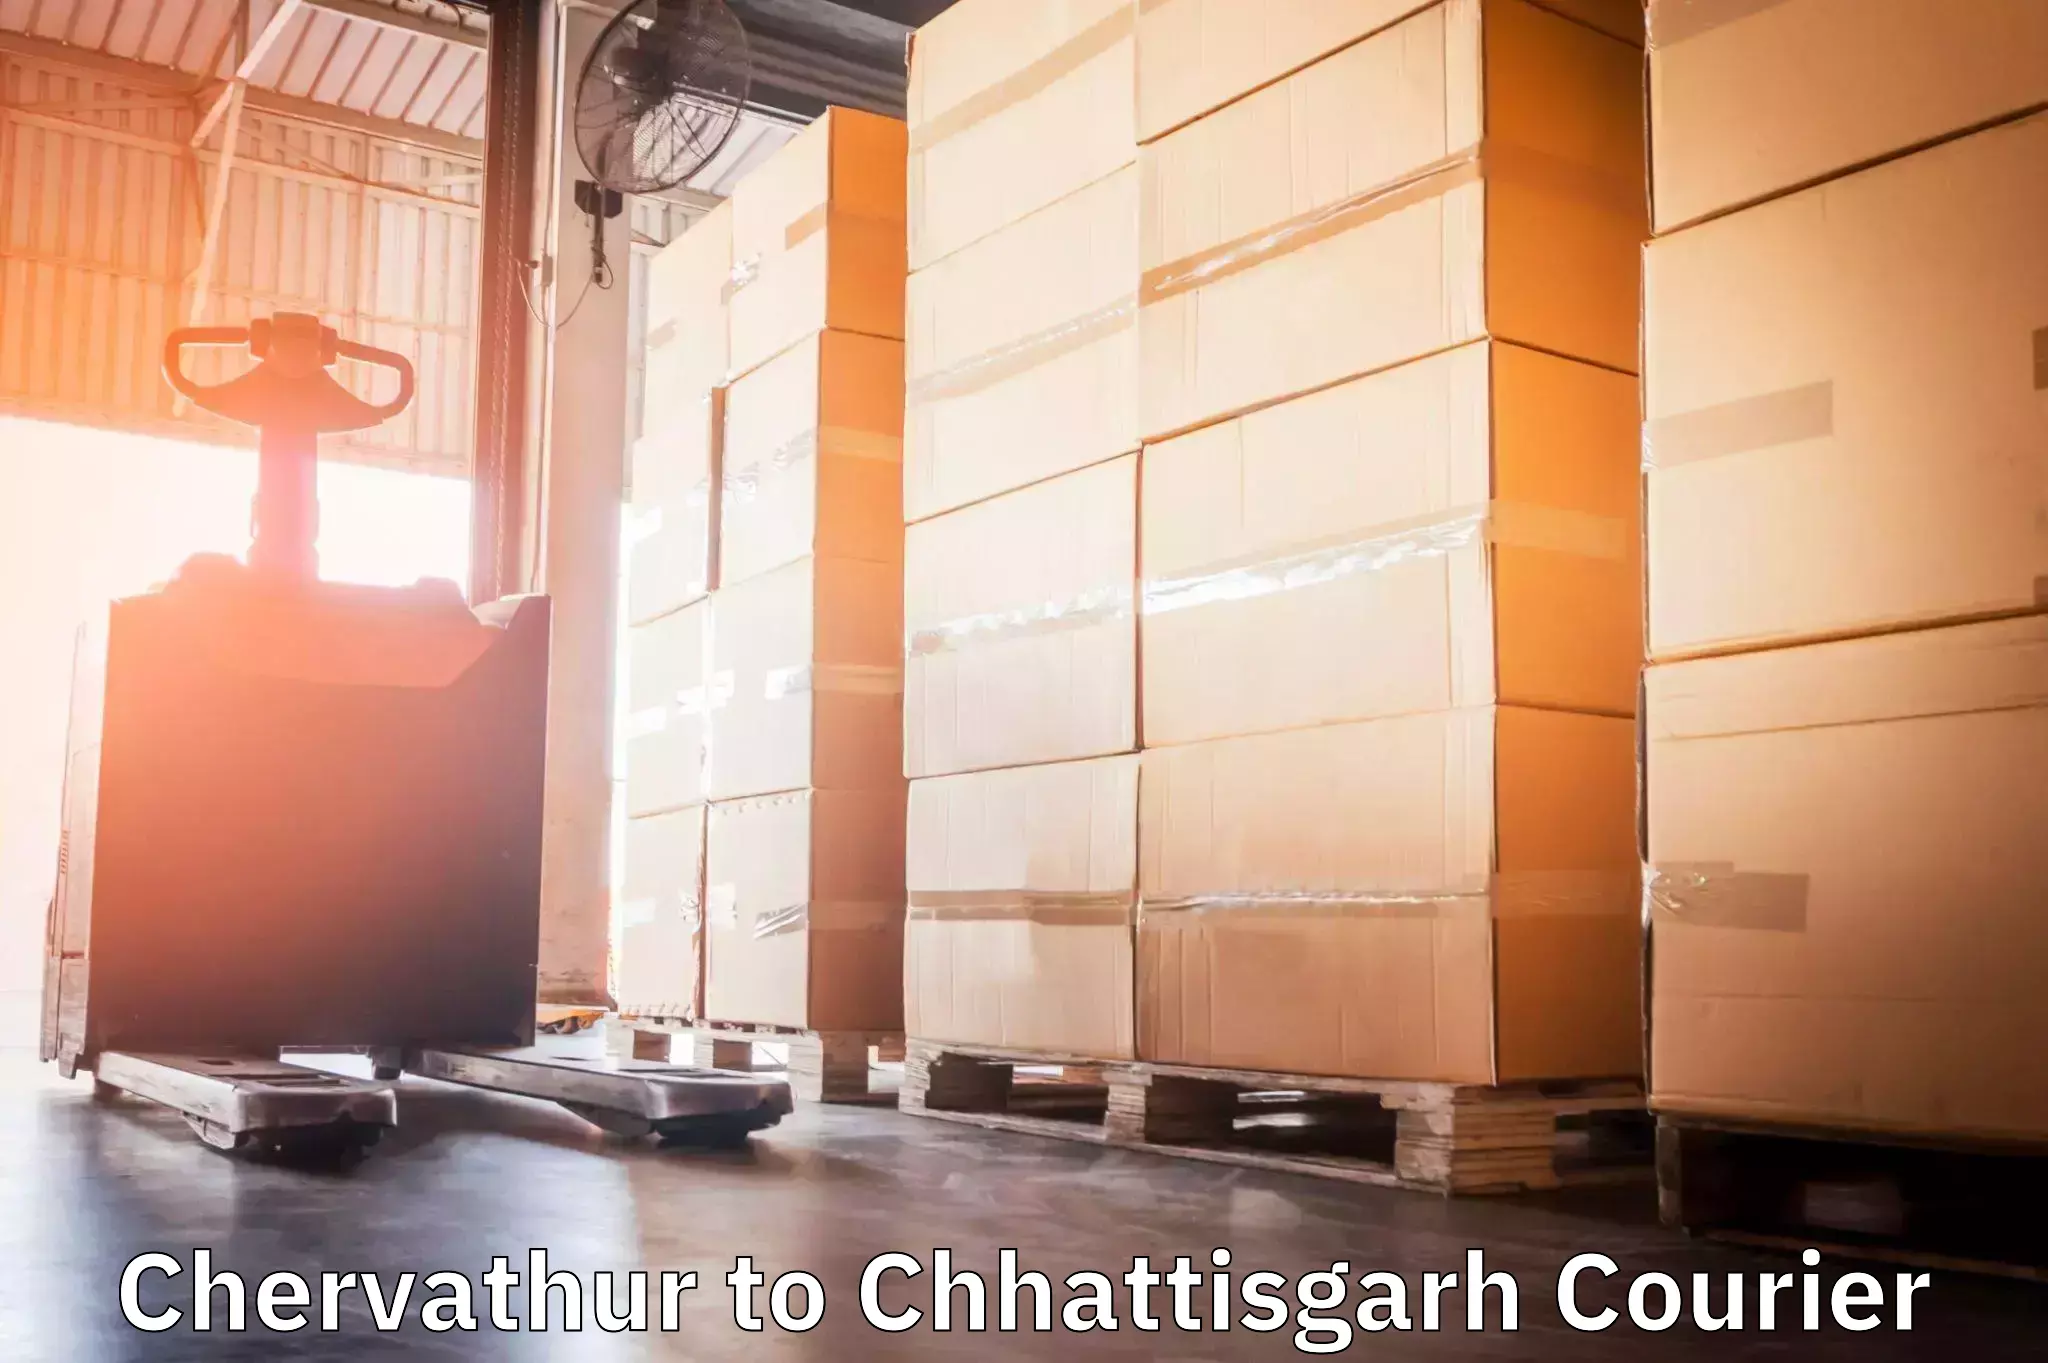 Global parcel delivery Chervathur to bagbahra